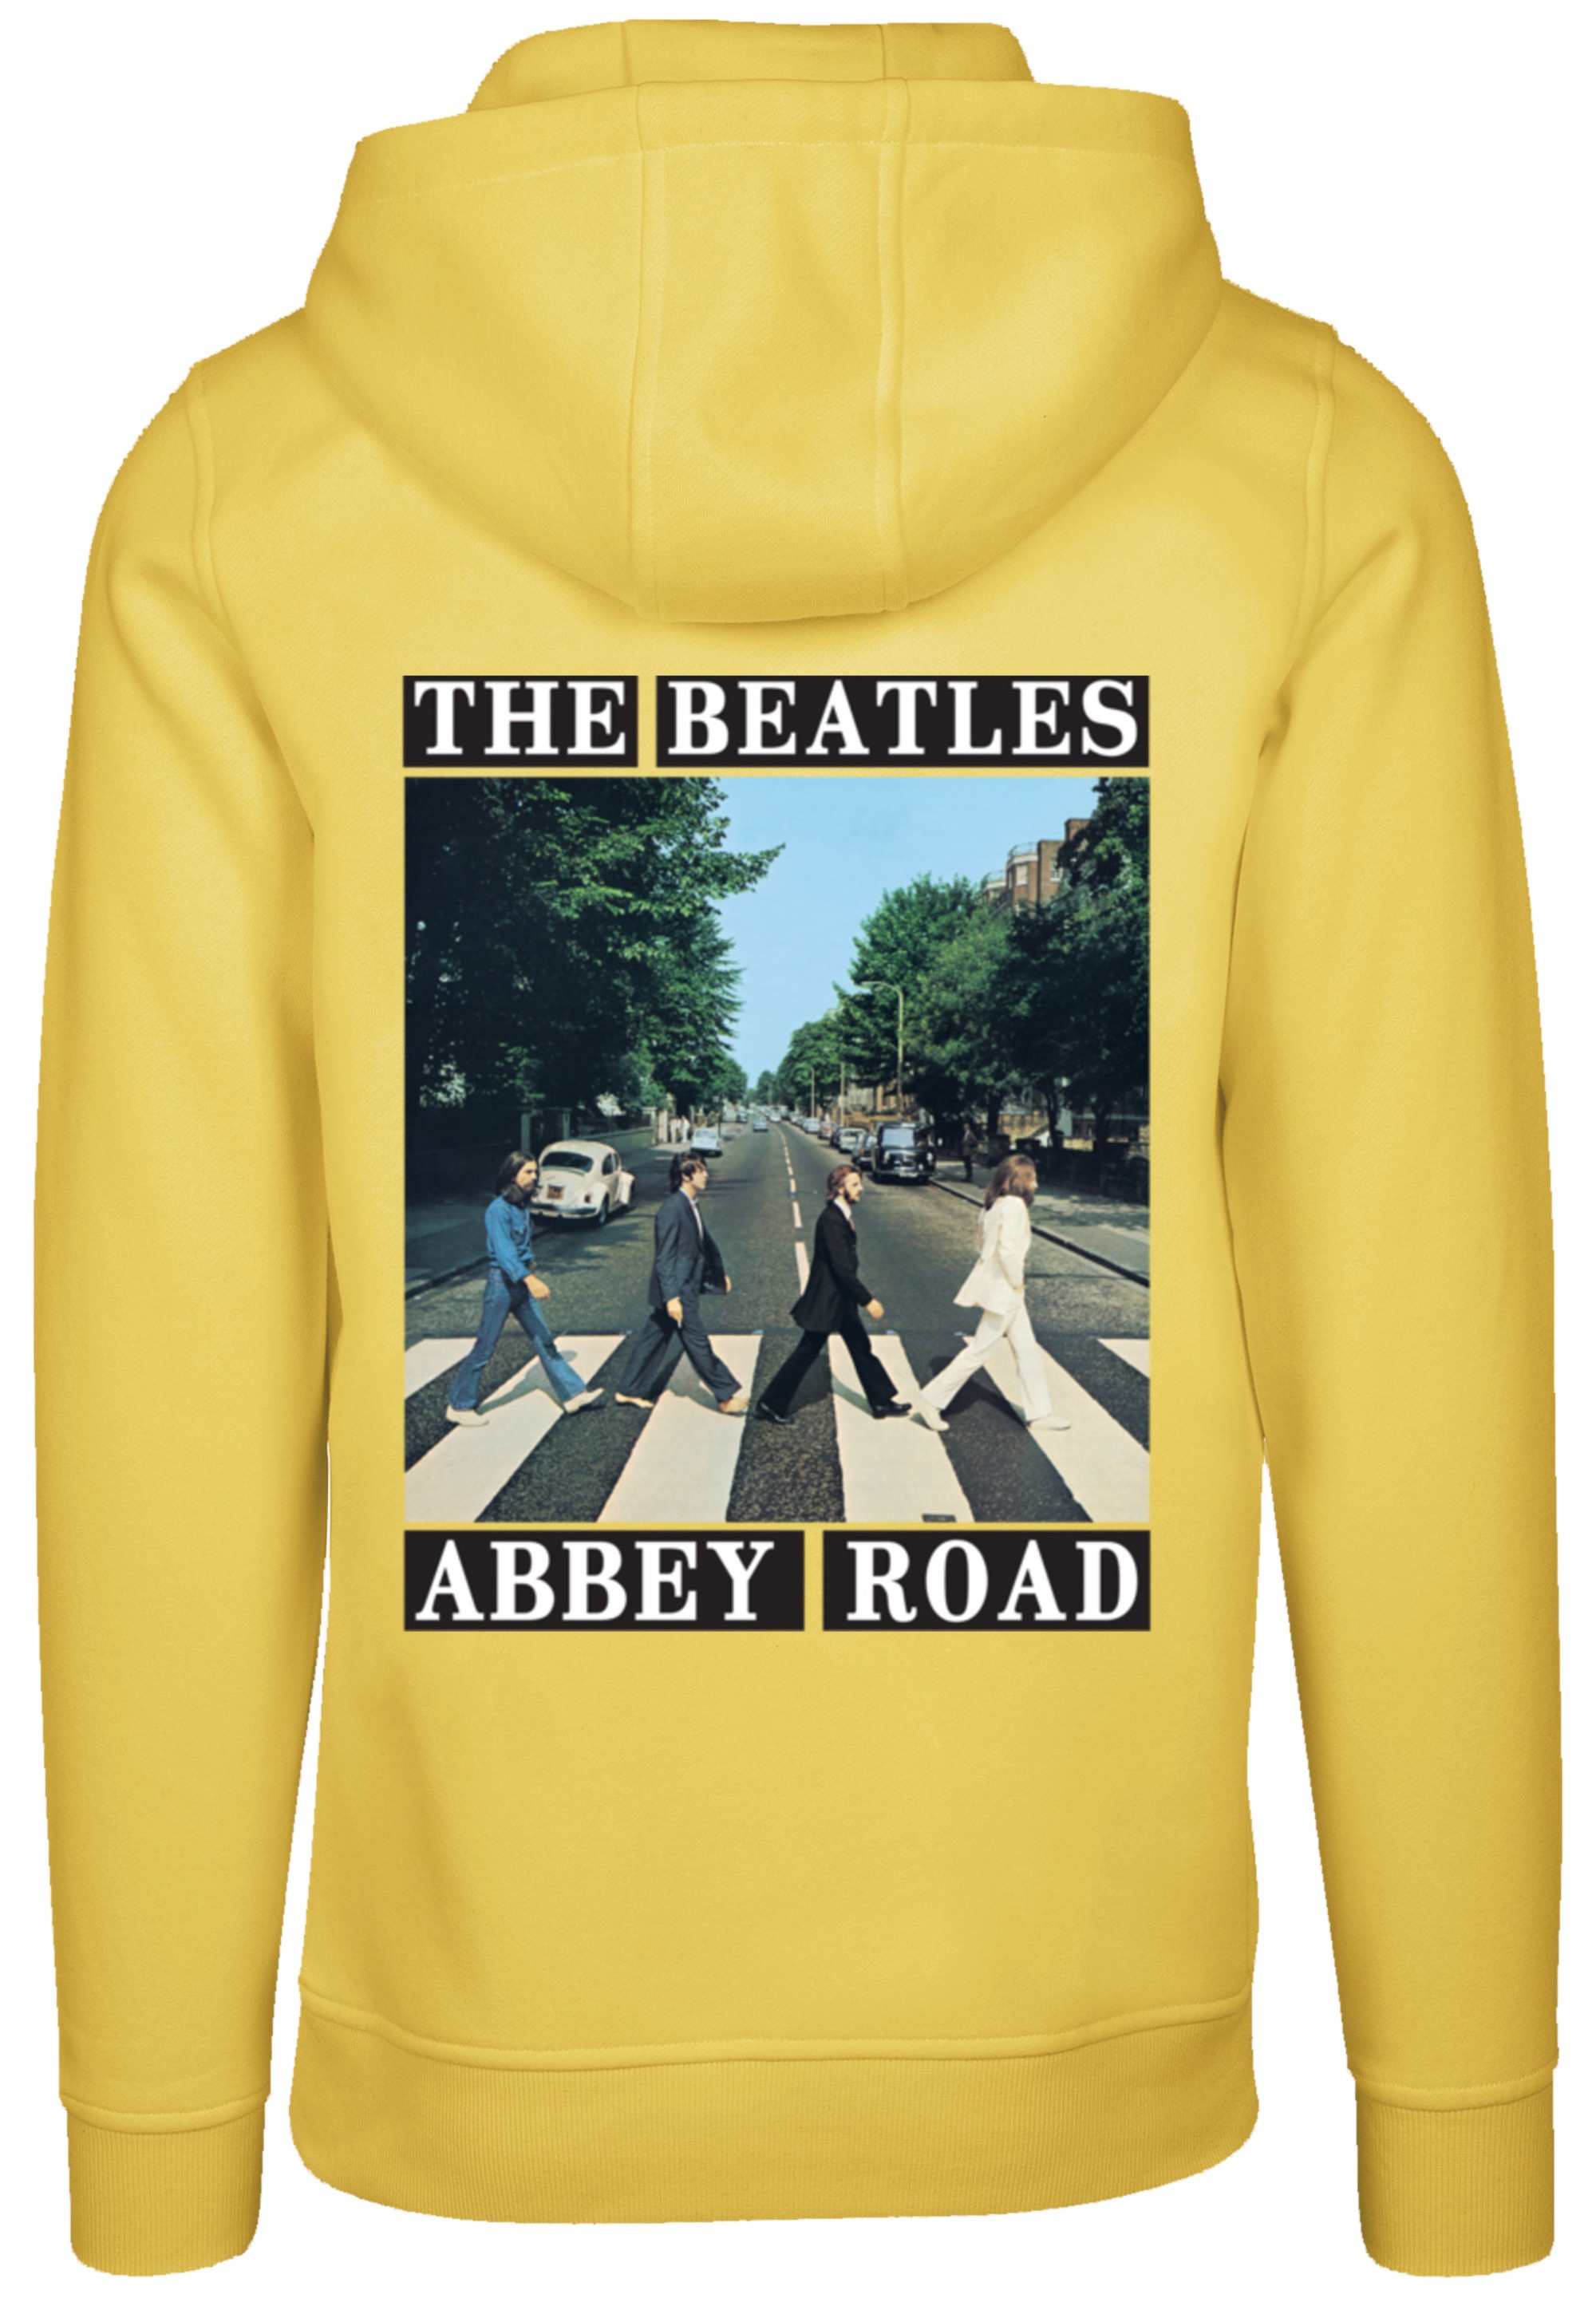 F4NT4STIC Kapuzenpullover »The Beatles Abbey Road Rock Musik Band«, Hoodie,  Warm, Bequem | I'm walking